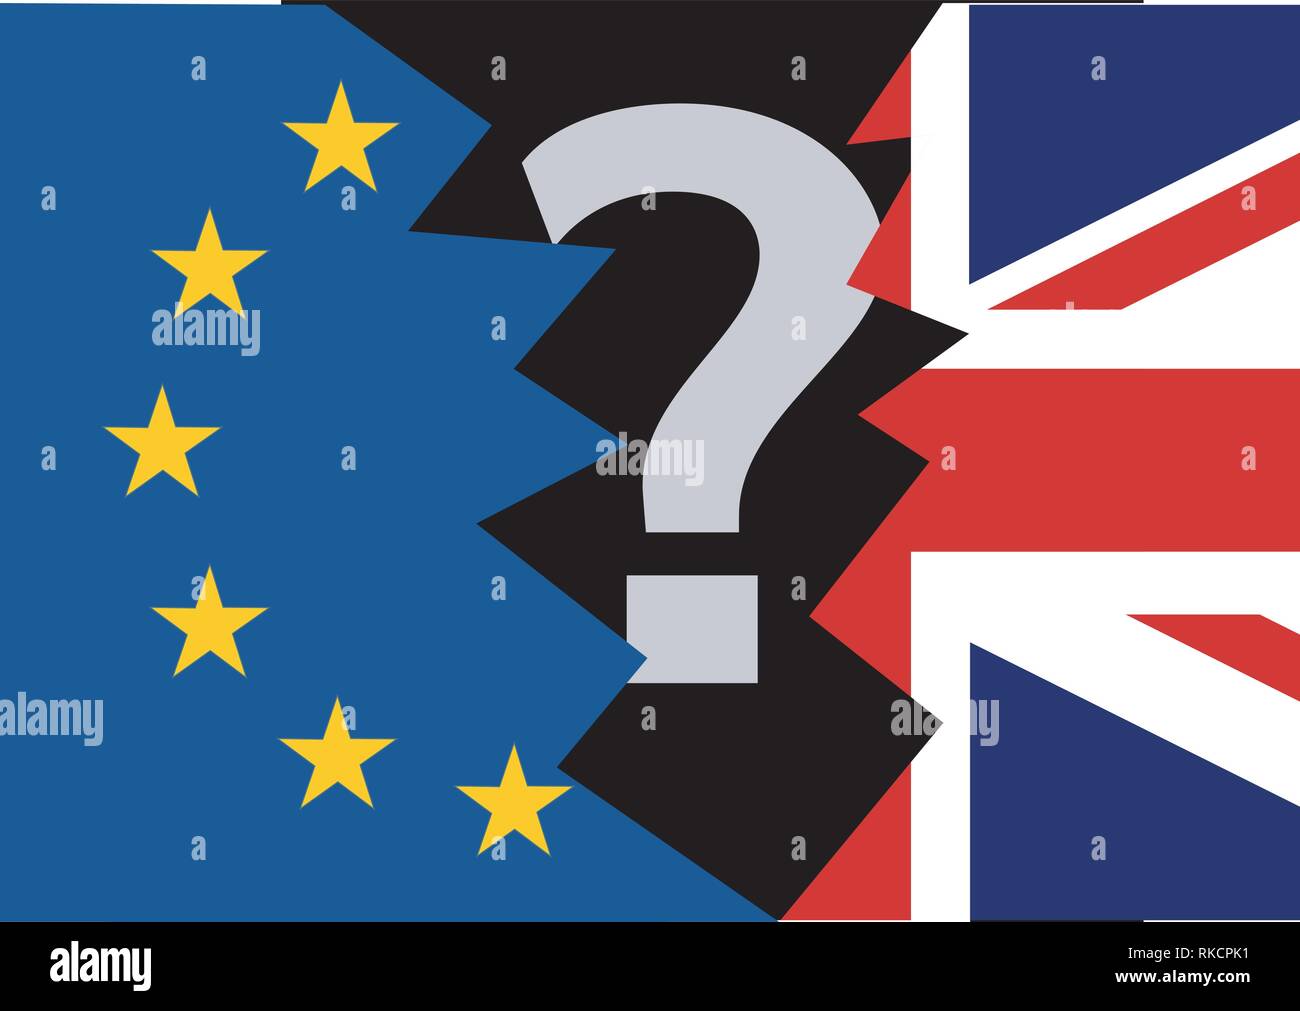 Brexit - blue torn european union EU flag and torn great britain flag England exit with question mark concept Stock Vector